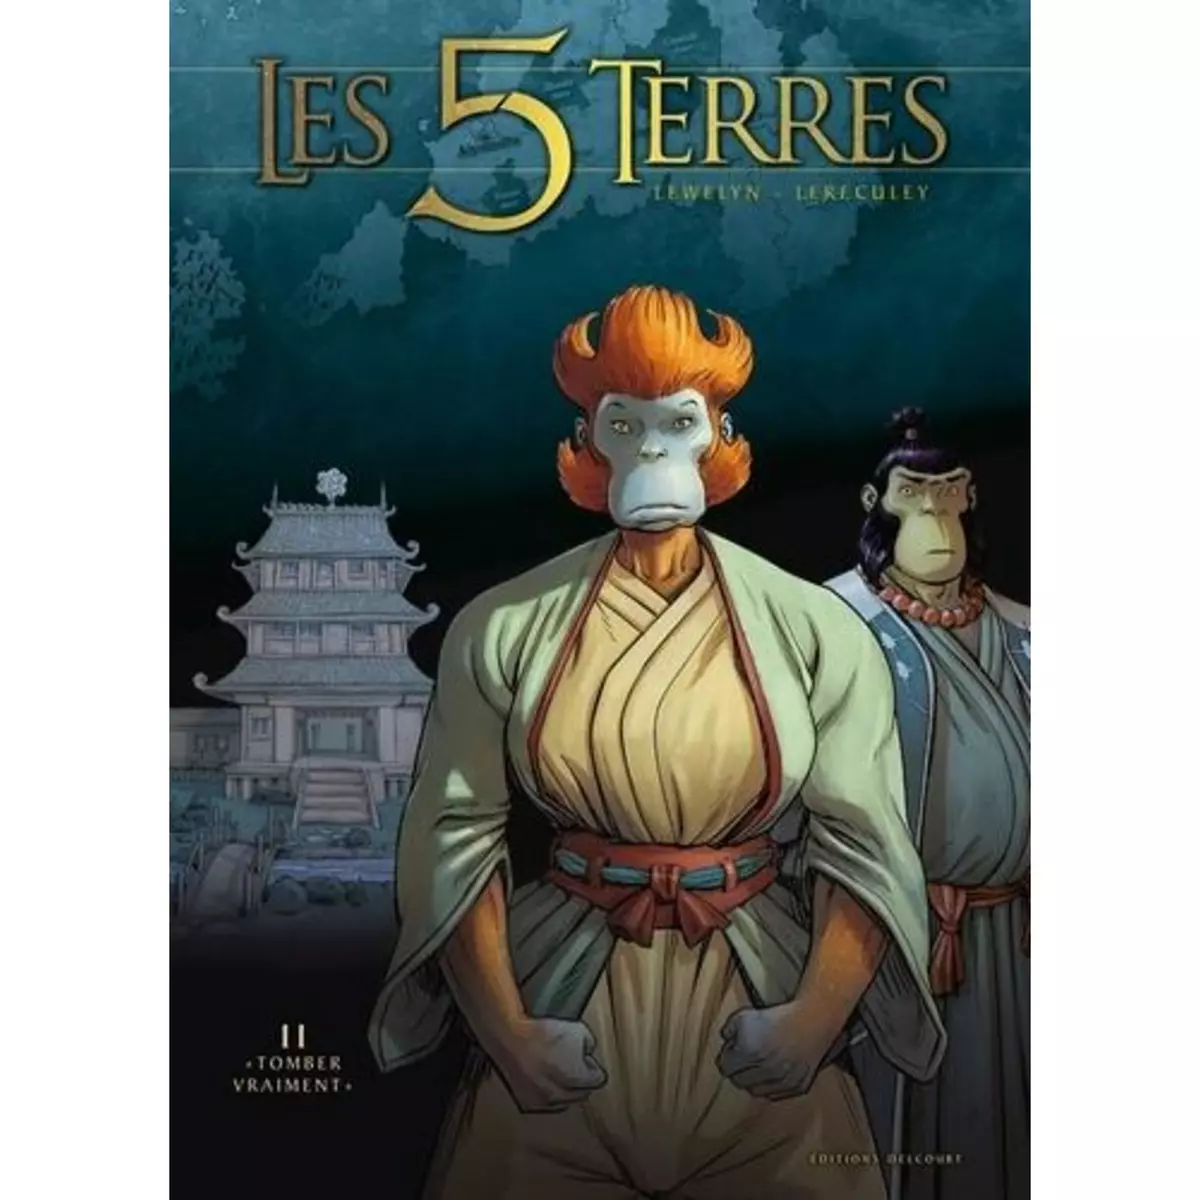  LES 5 TERRES : CYCLE II - LYS TOME 11 :  TOMBER VRAIMENT , Lewelyn